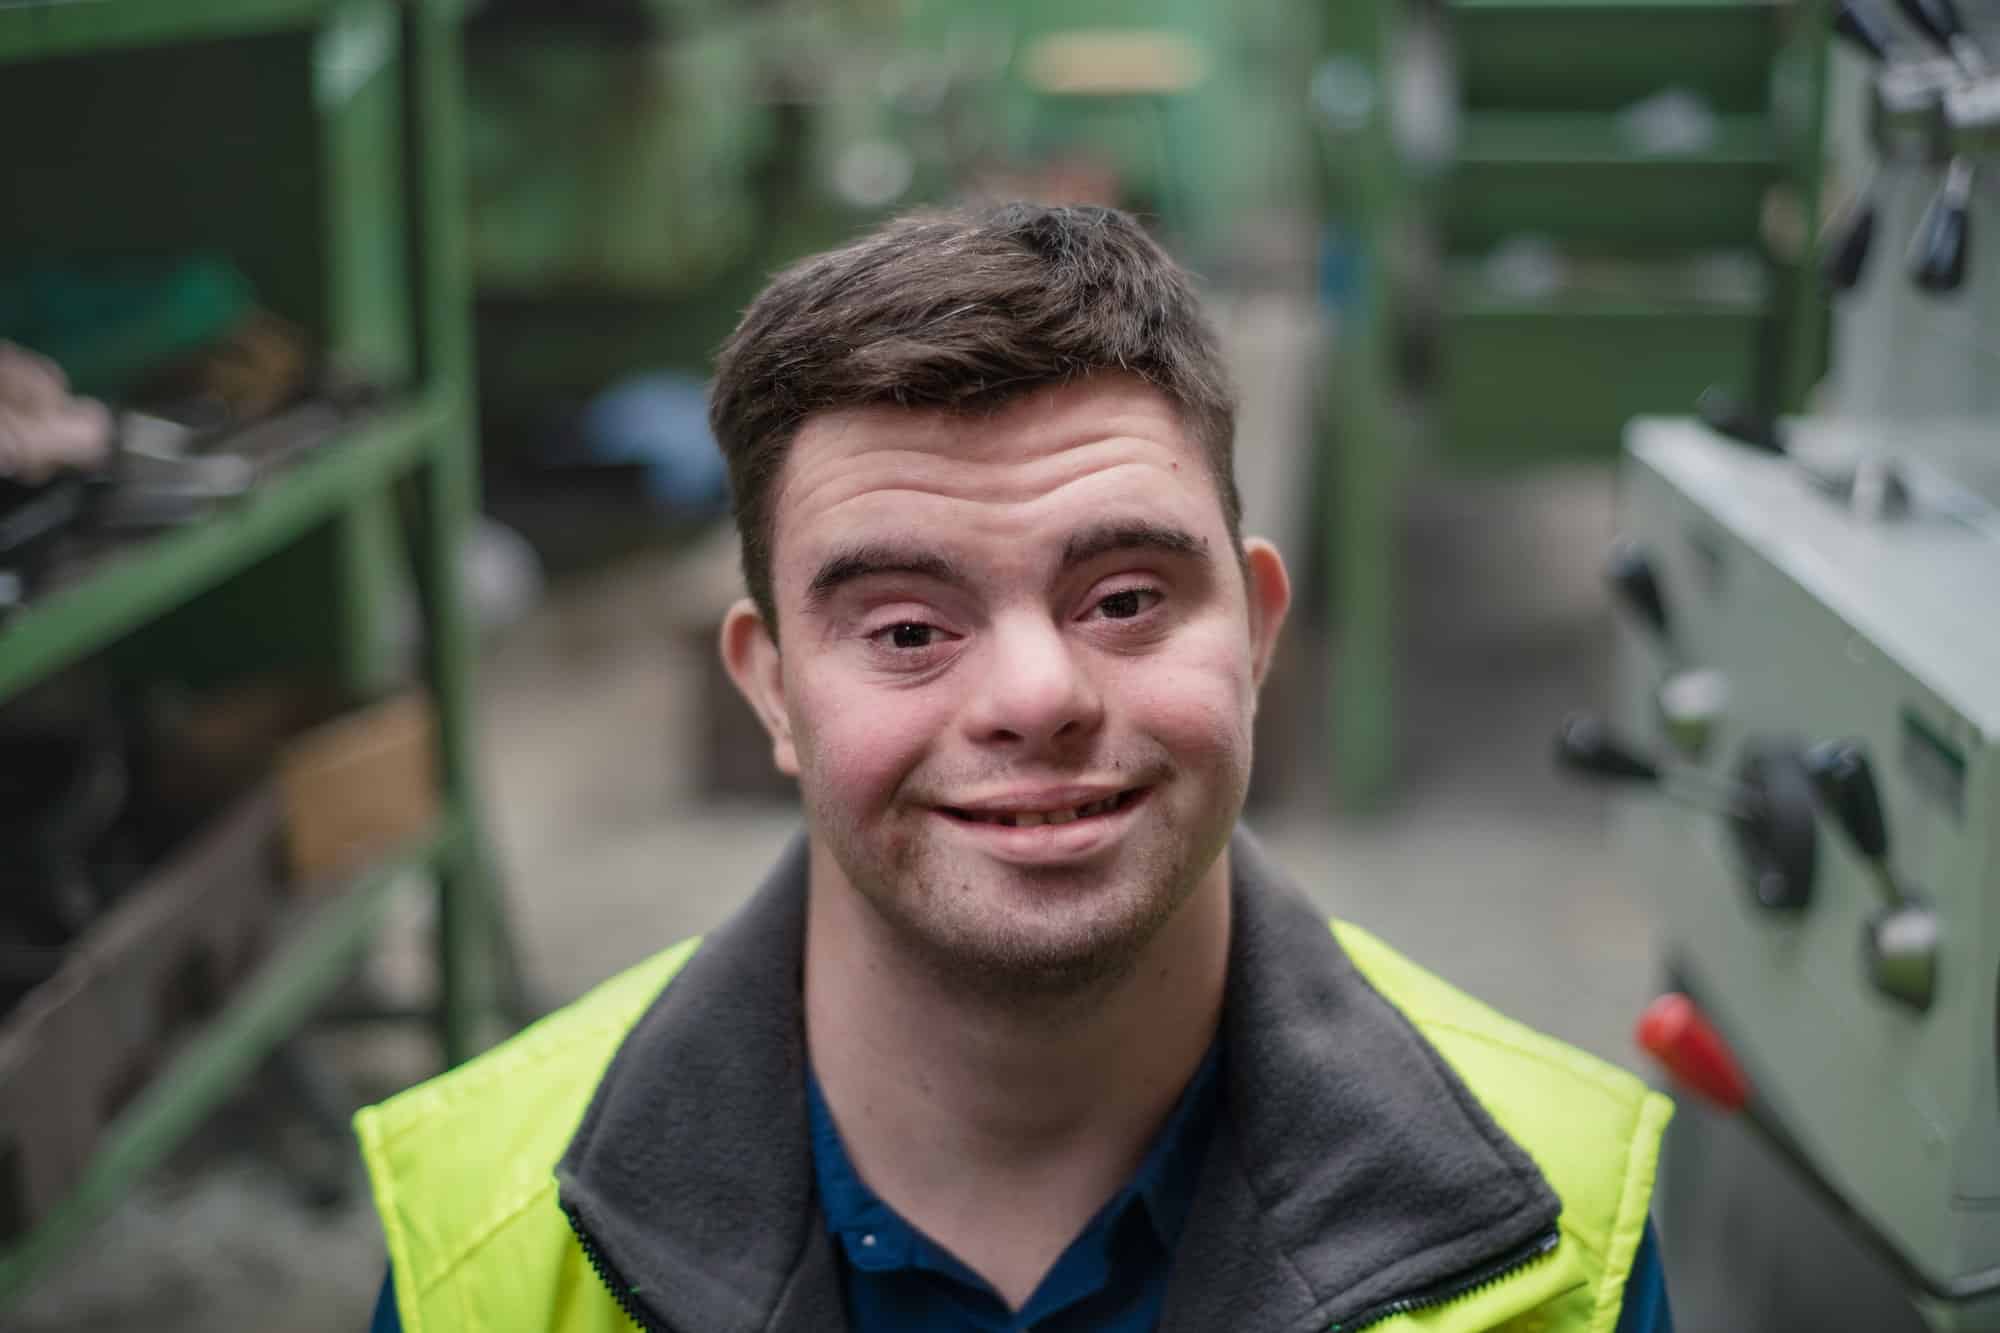 Young man with Down syndrome working in industrial factory, social integration concept.